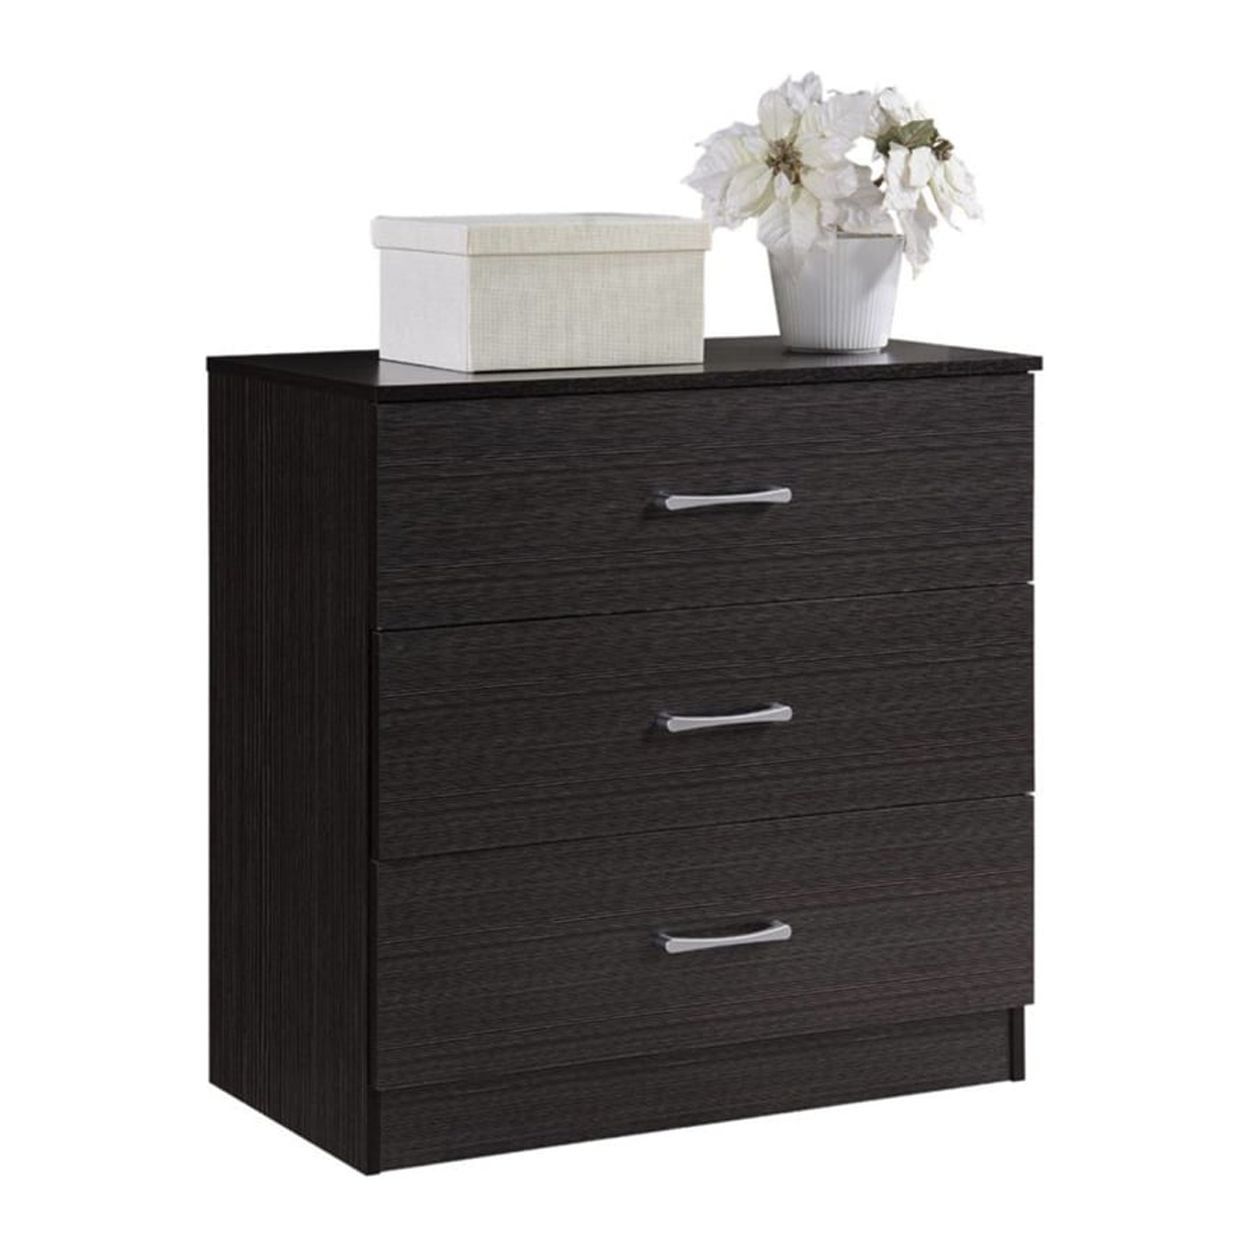 Sleek Contemporary 3-Drawer Chest in Chocolate with Dovetail Construction